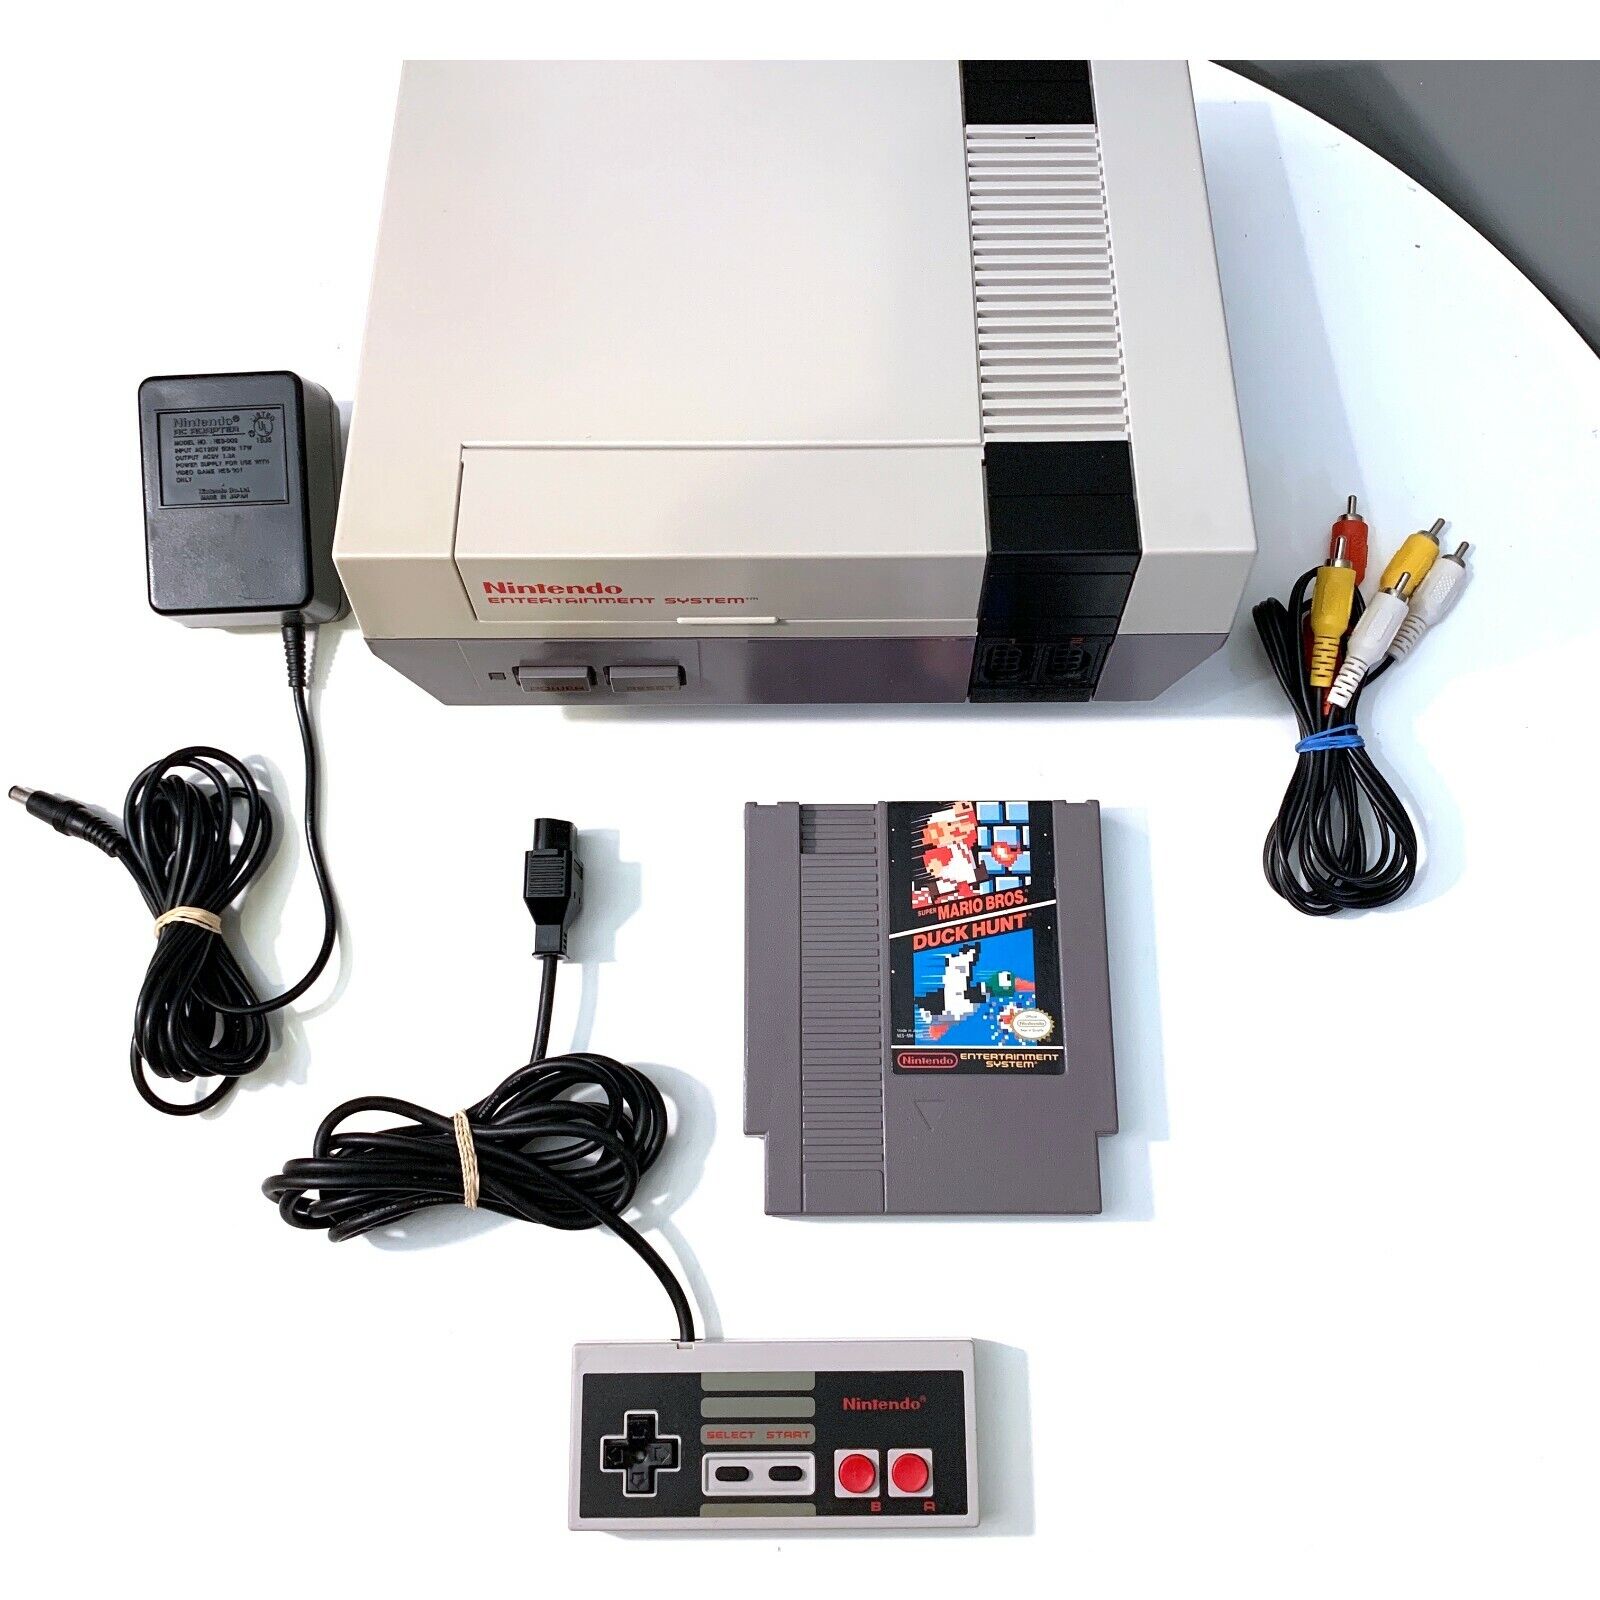 1985 Original NES Nintendo System Console + New 72 Pin Authentic & Clean